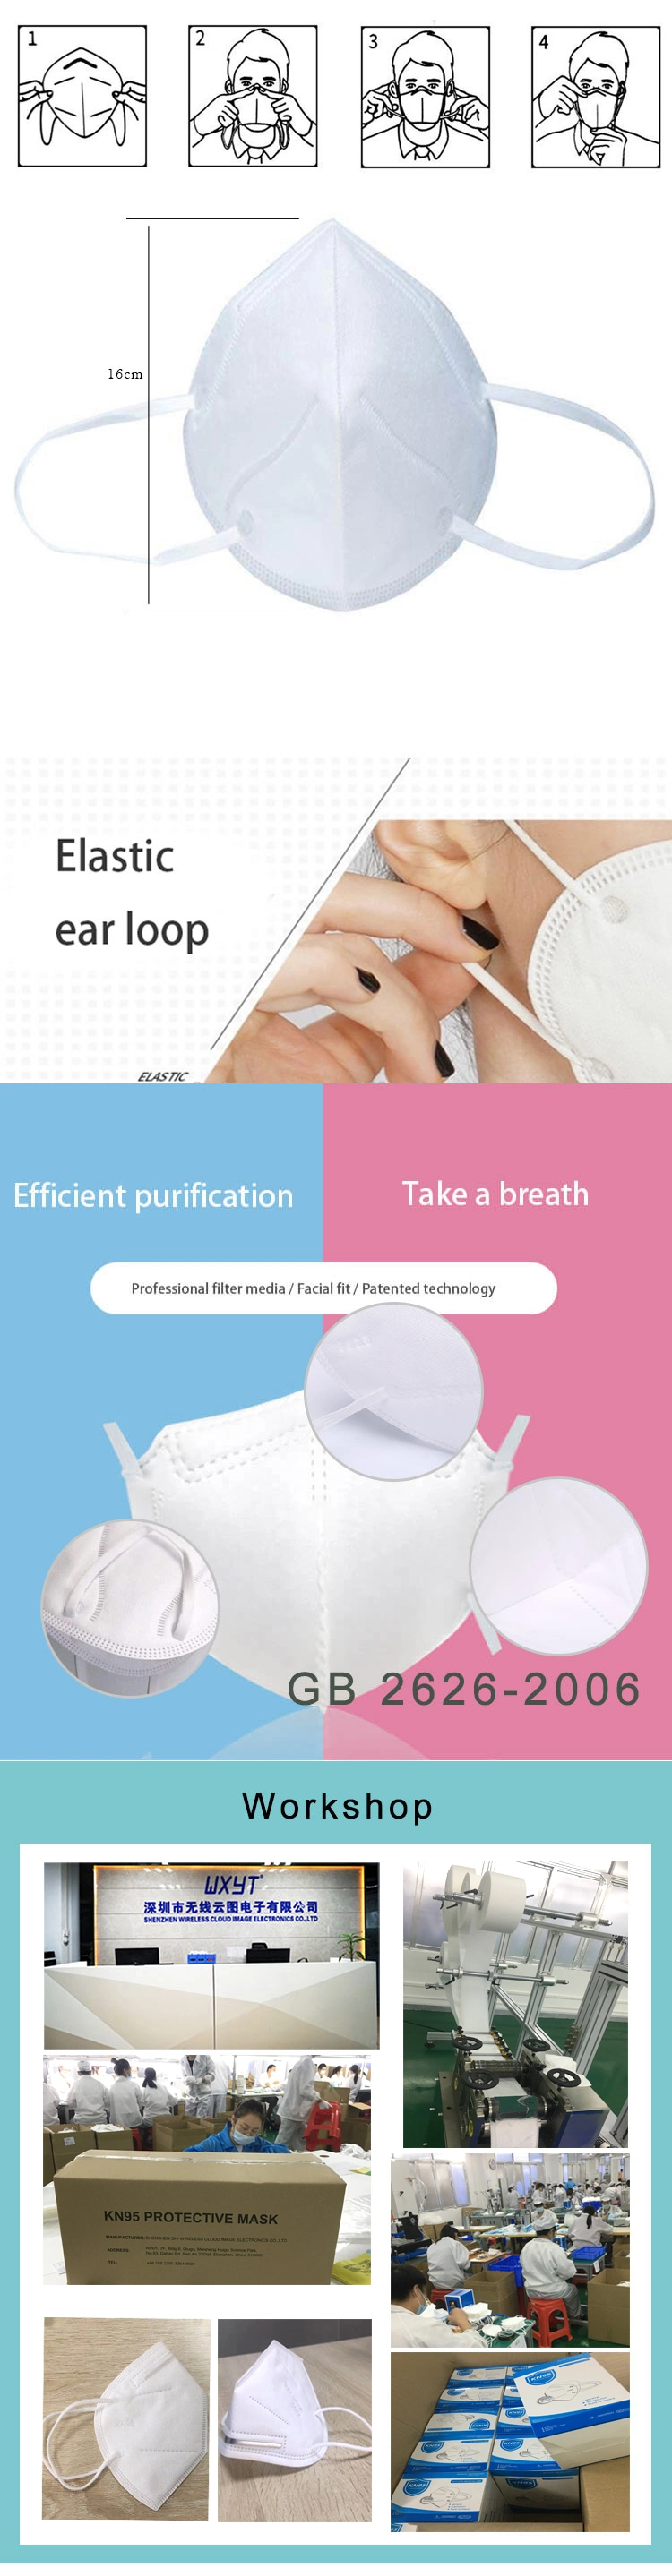 N95 KN95 Self-Inhalation Air Purifying Particulate Respirator Disposable Face Mask